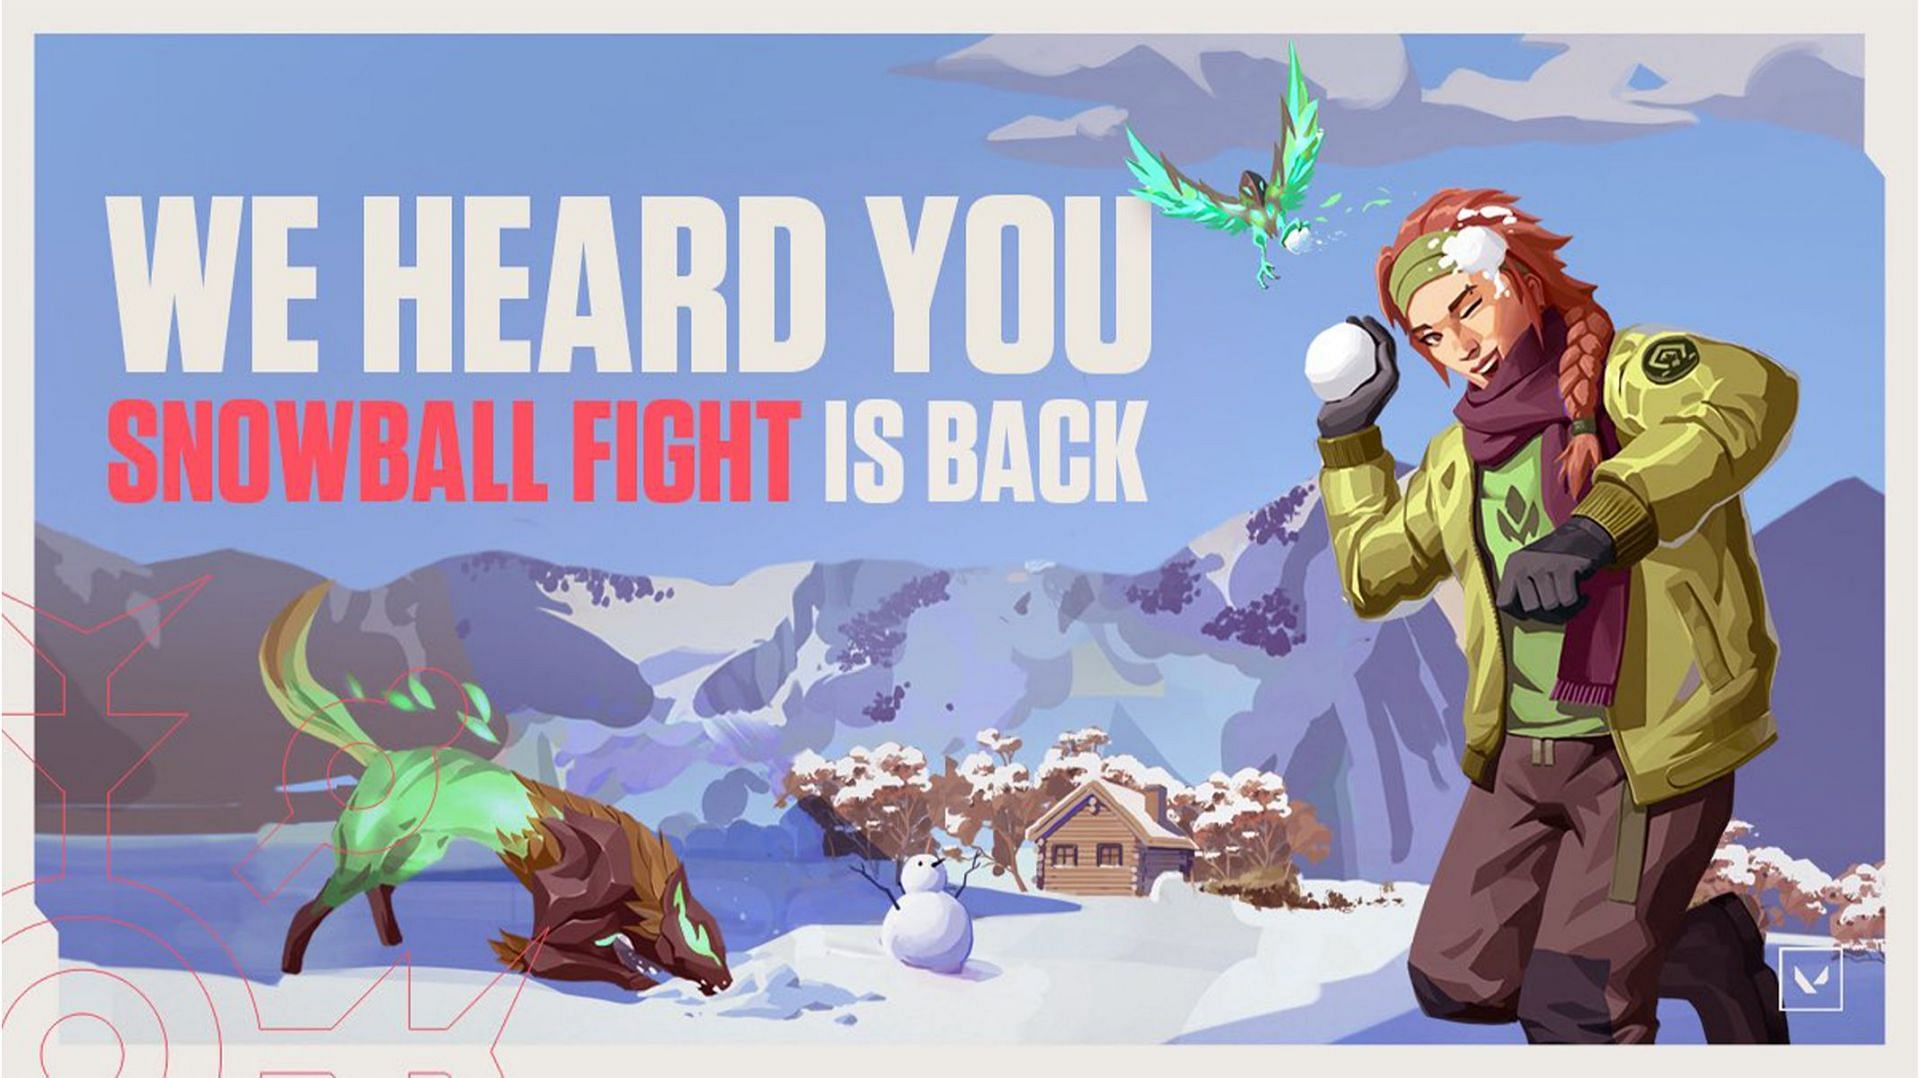 Snowball Fight makes a return to Valorant this holiday season (Image via Riot Games)